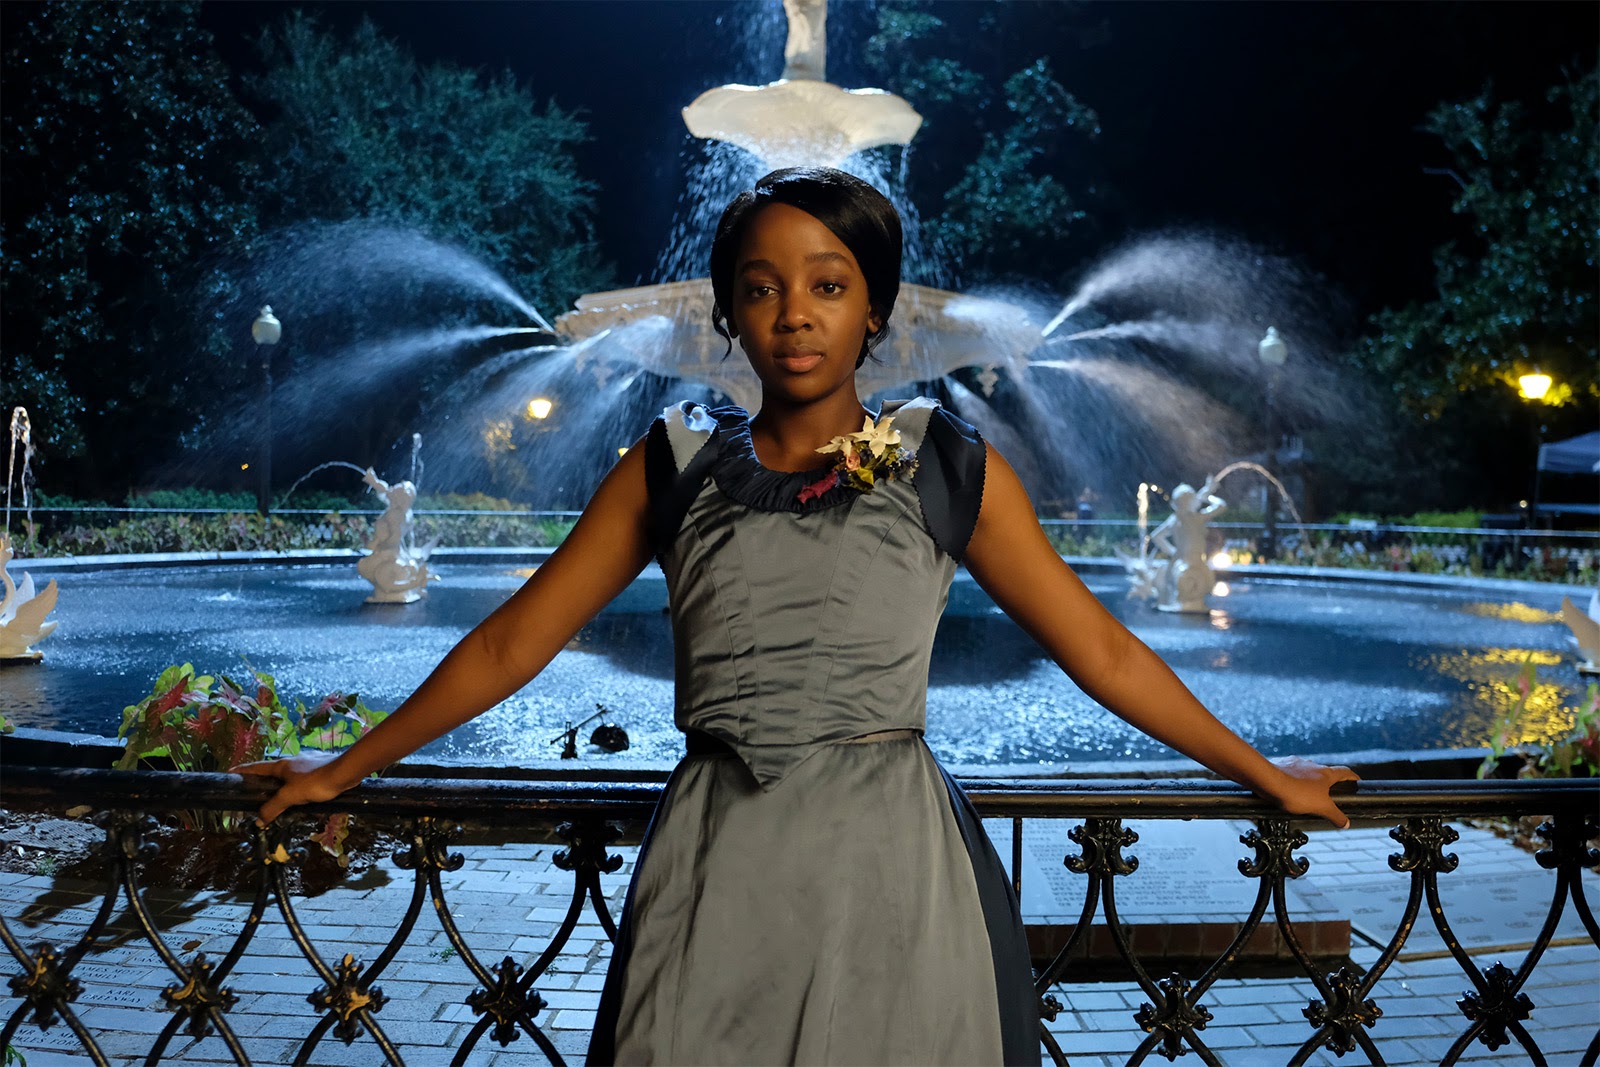 Cora in front of a fountain in The Undeground Railroad